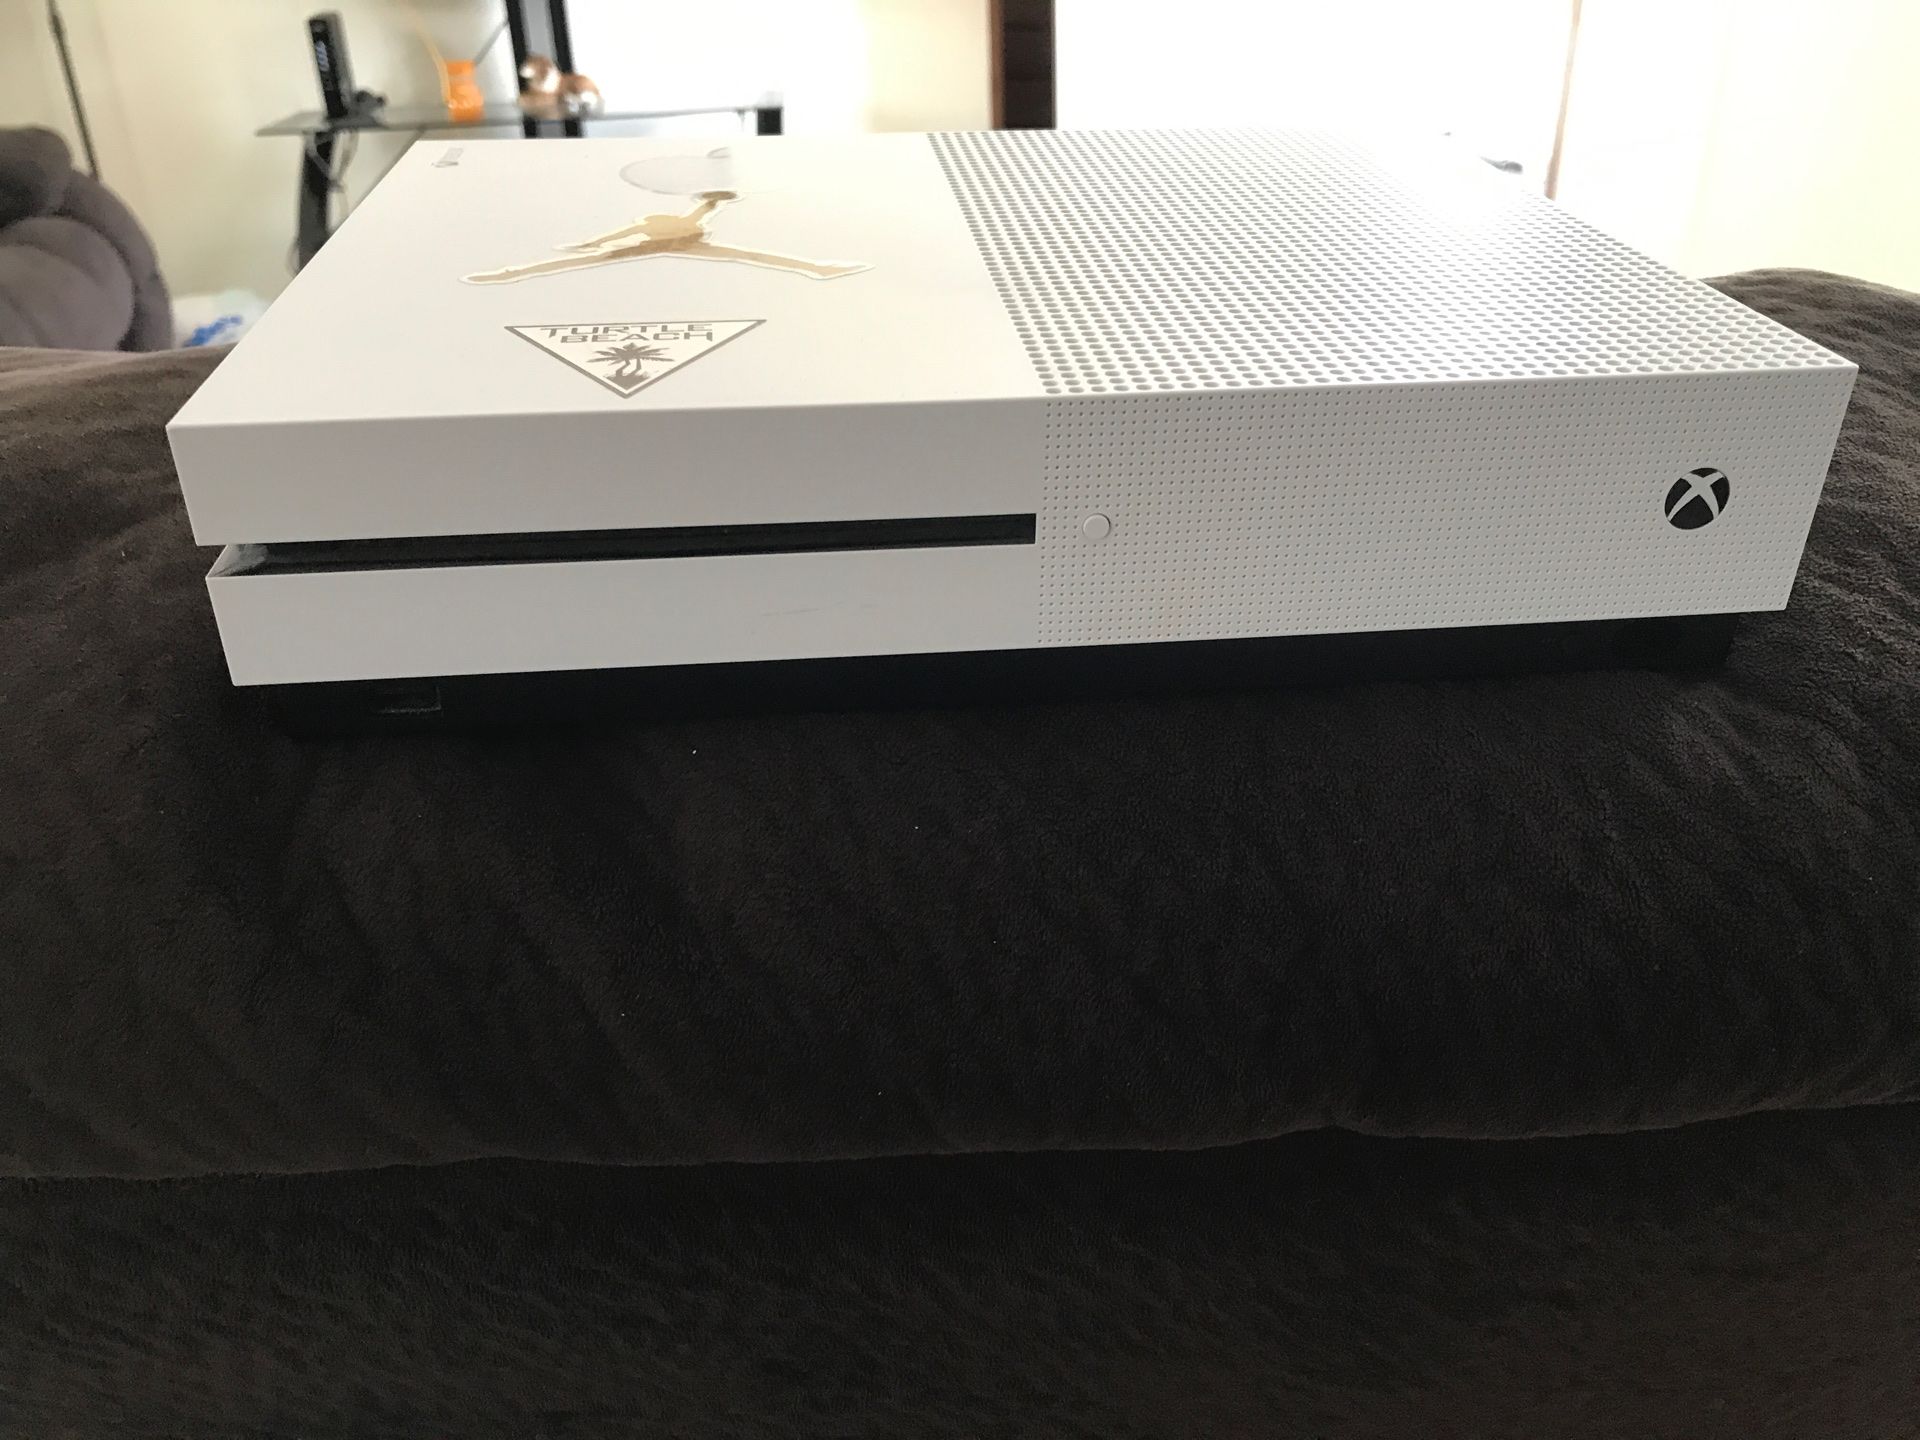 Xbox one s give me your best offer